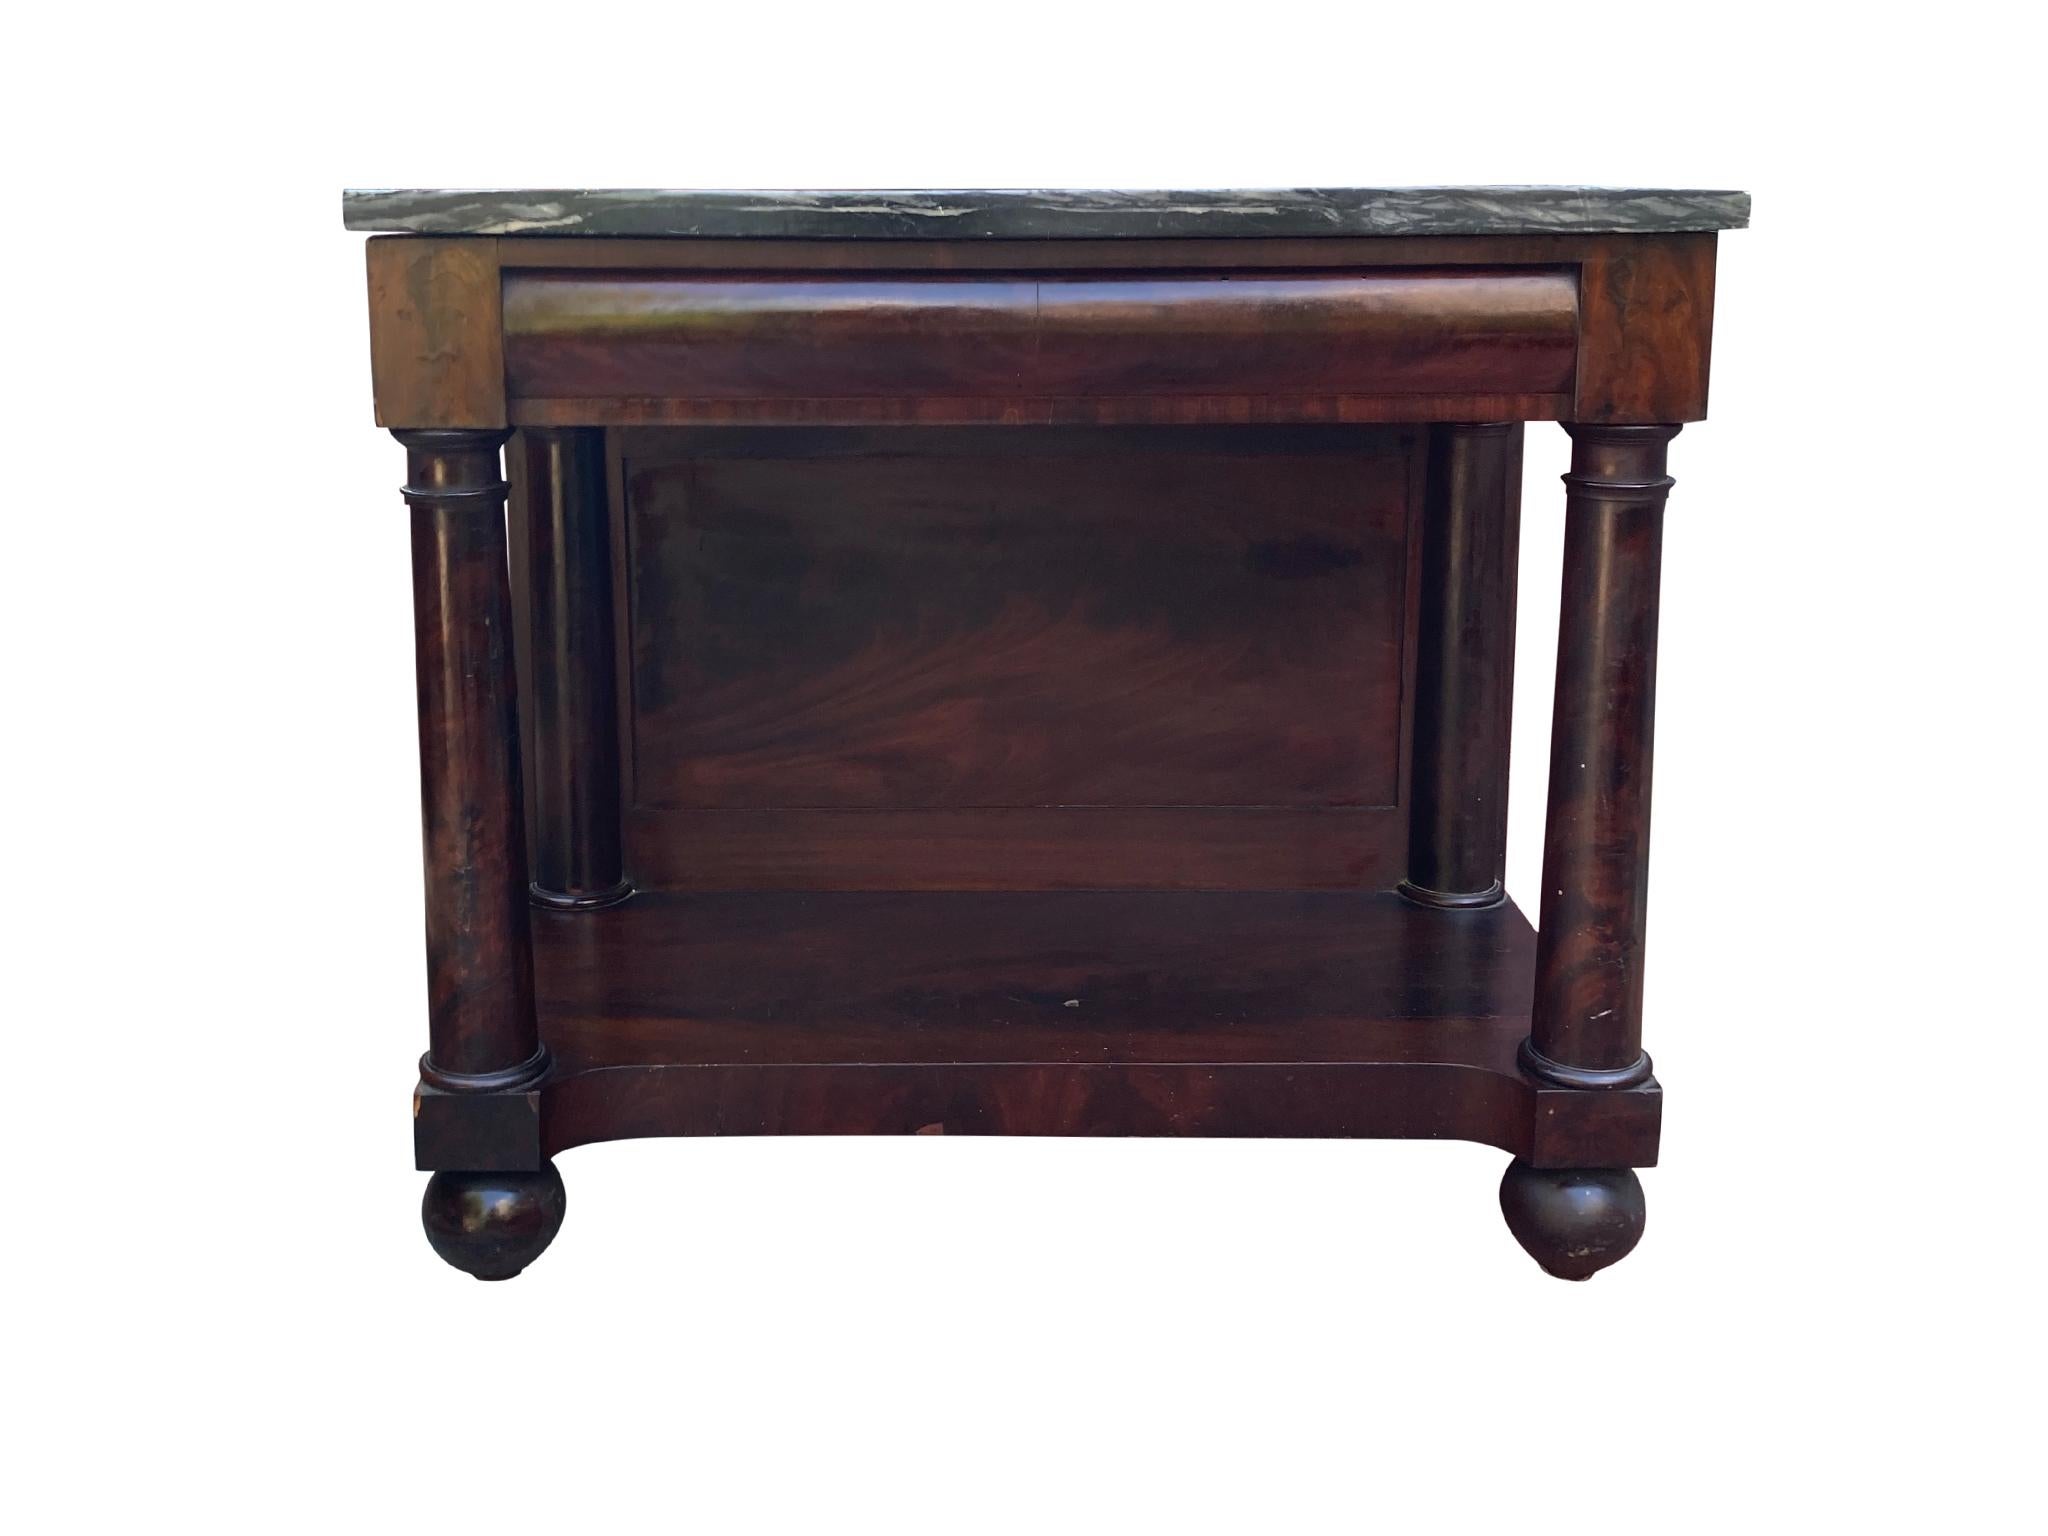 This American Federal pier table was handmade circa 1825. It is comprised of a mahogany base with mahogany veneer and marble top. Inspired by Classical forms, the table's design features column-shaped leg supports and turned feet. 

Overall